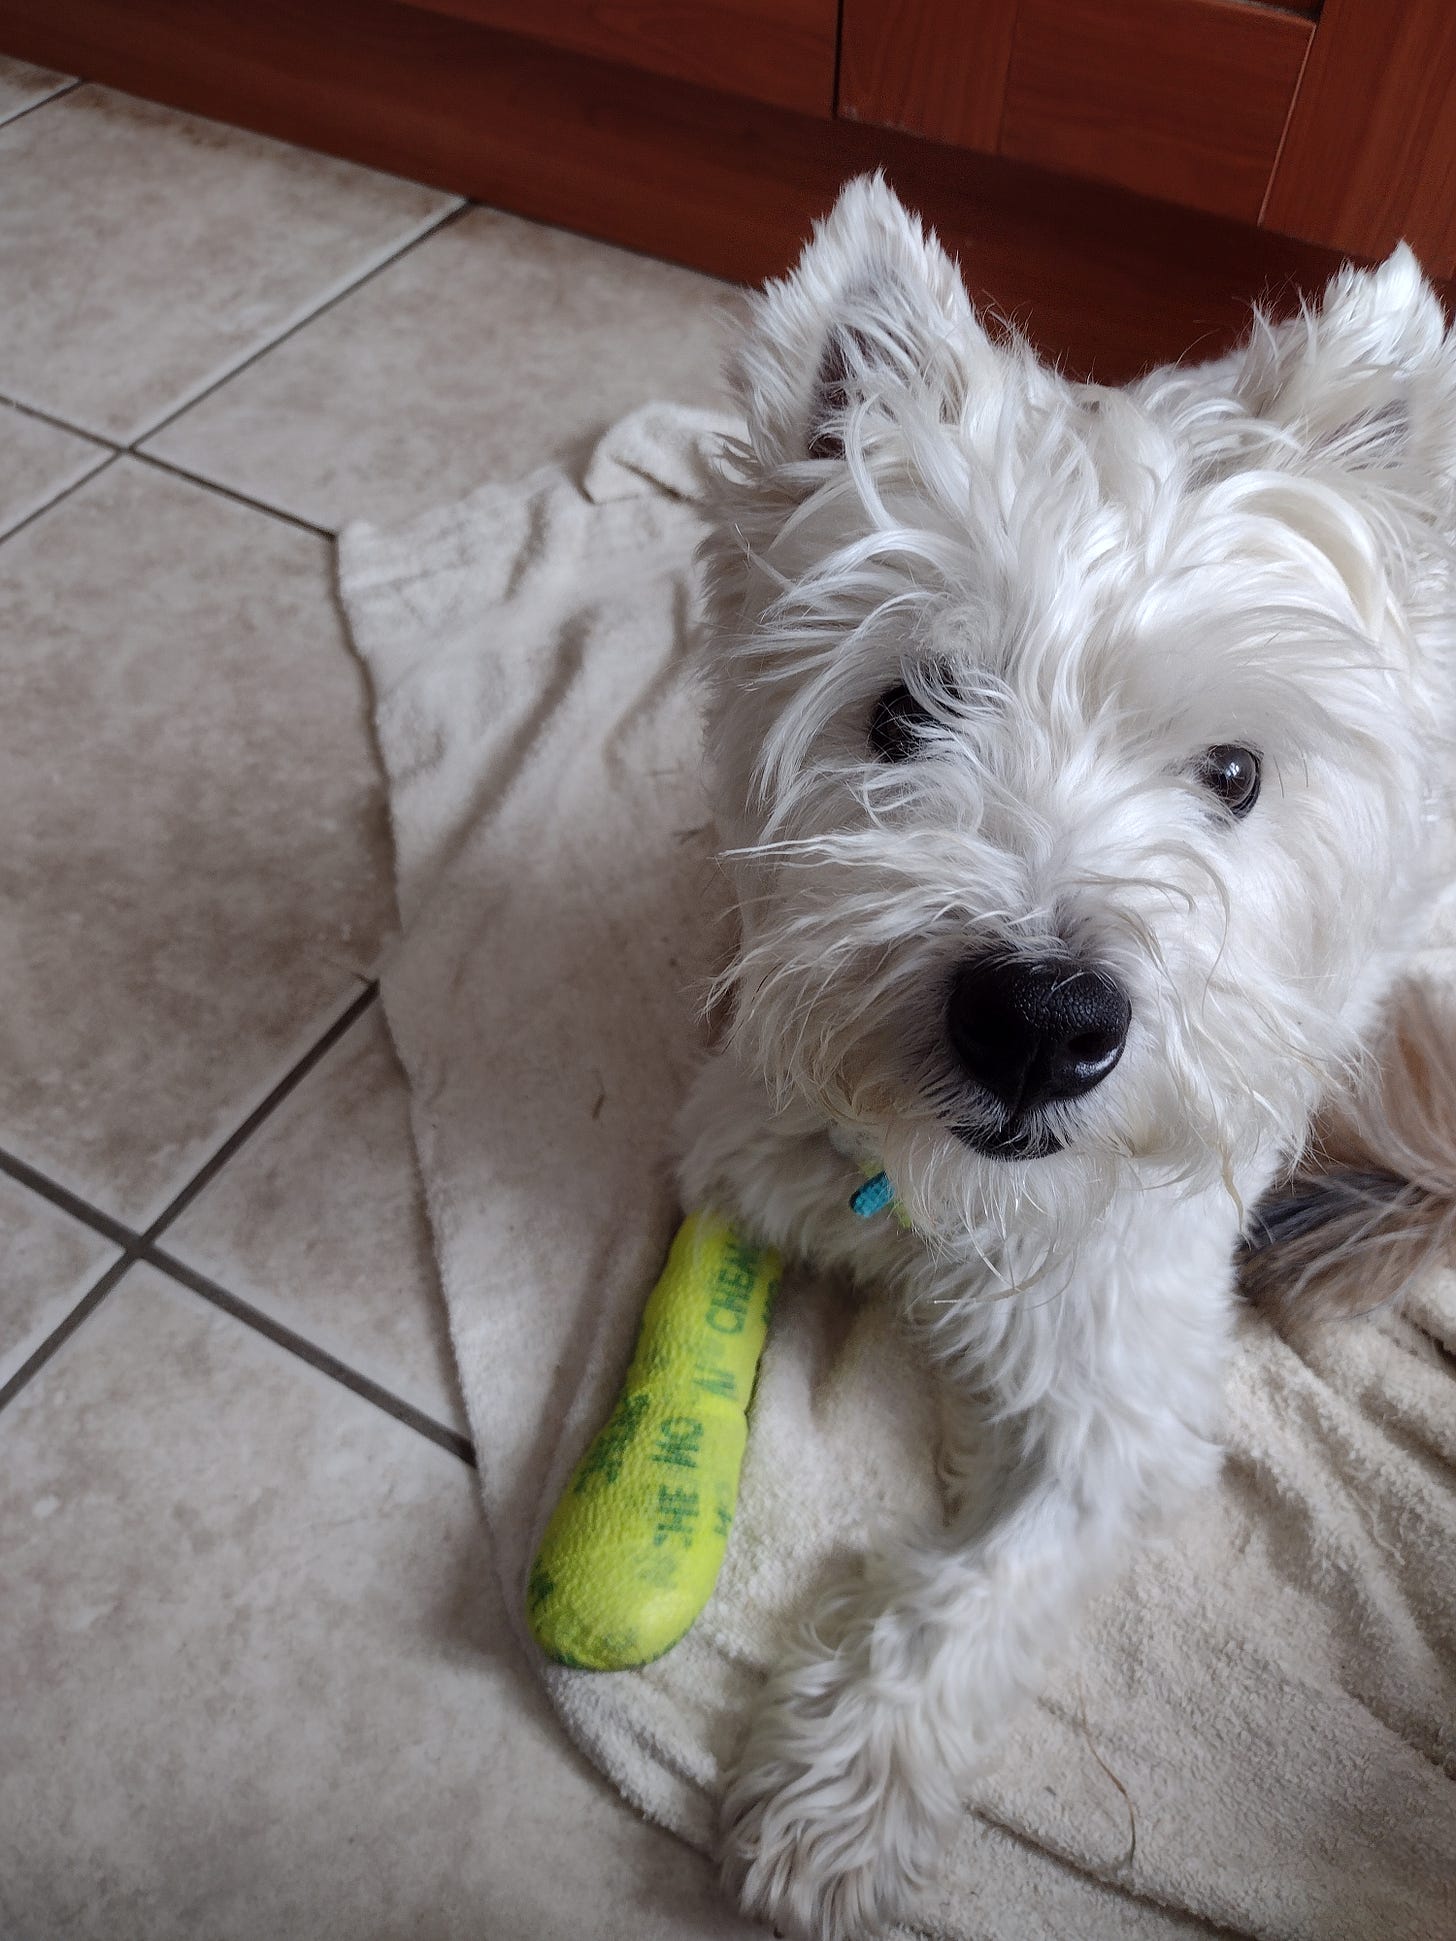 a picture of my dog - a west highland terrier - with a bandage around his leg